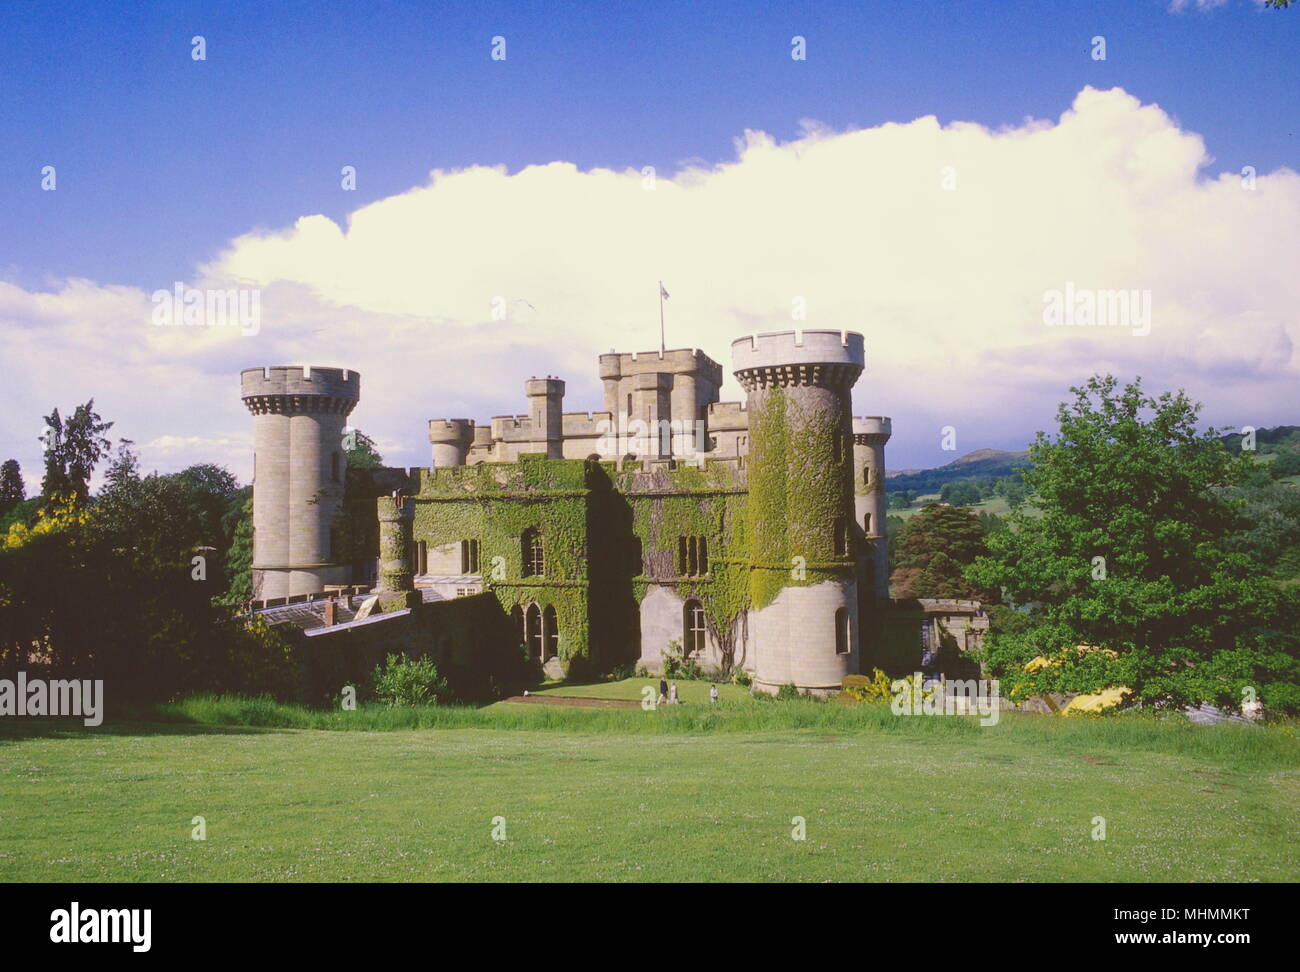 View of Eastnor Castle, near the town of Ledbury in Herefordshire.  It is a 19th century mock castle, built in 1810.       Date: 1989 Stock Photo